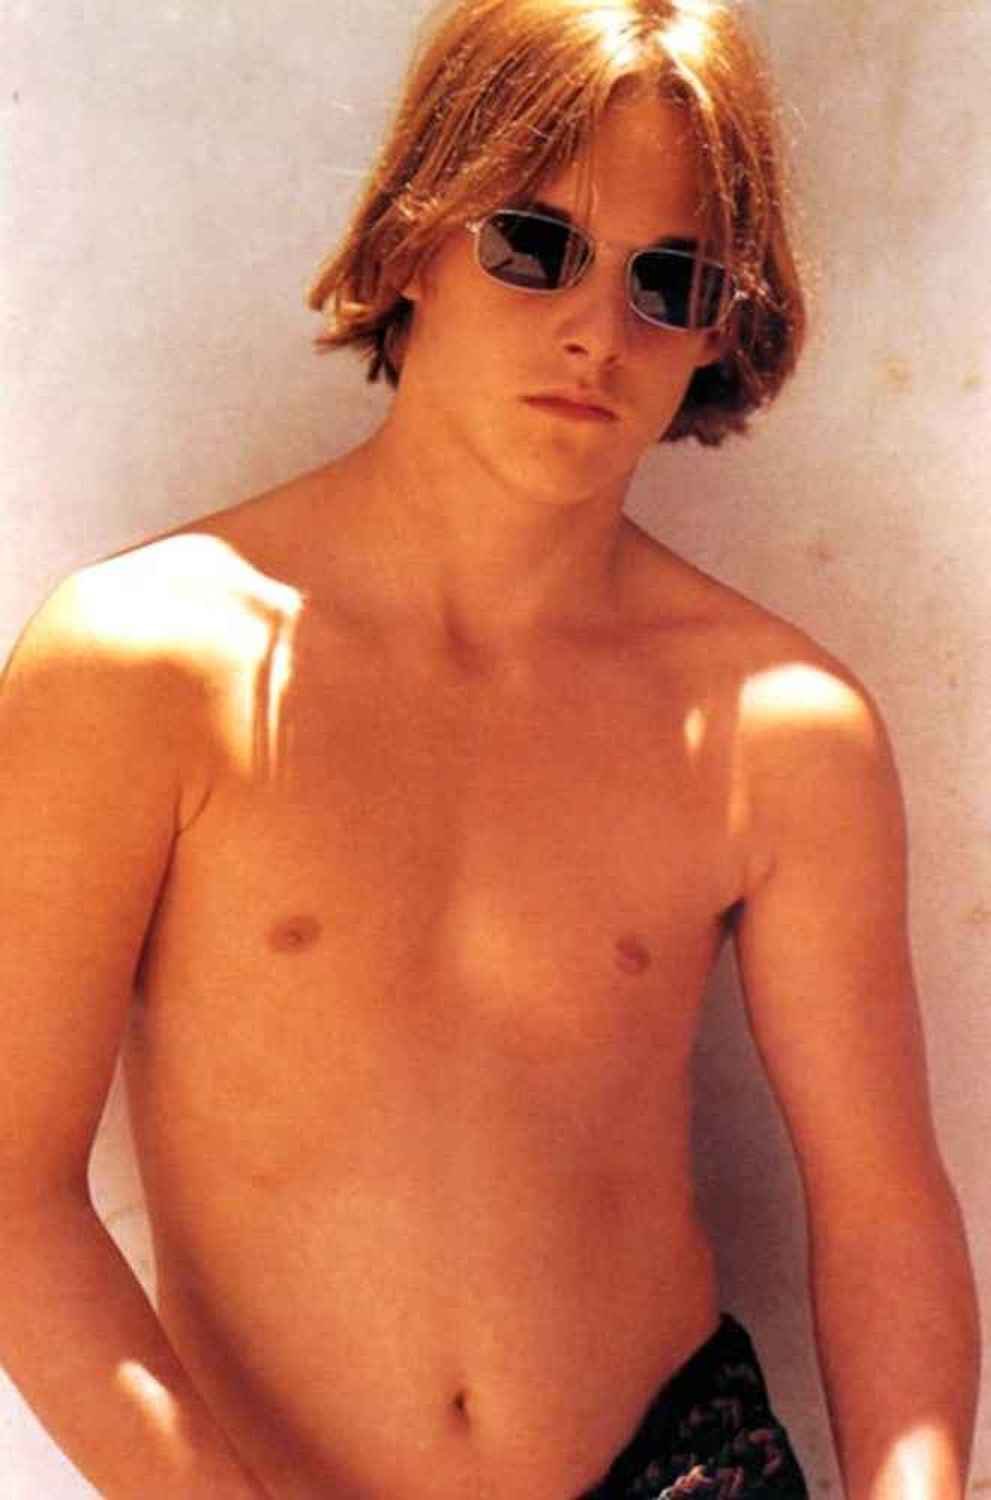 Brad renfro naked - 🧡 Dreamers 1 Nude Sexy Babes Wallpaper Free Download N...